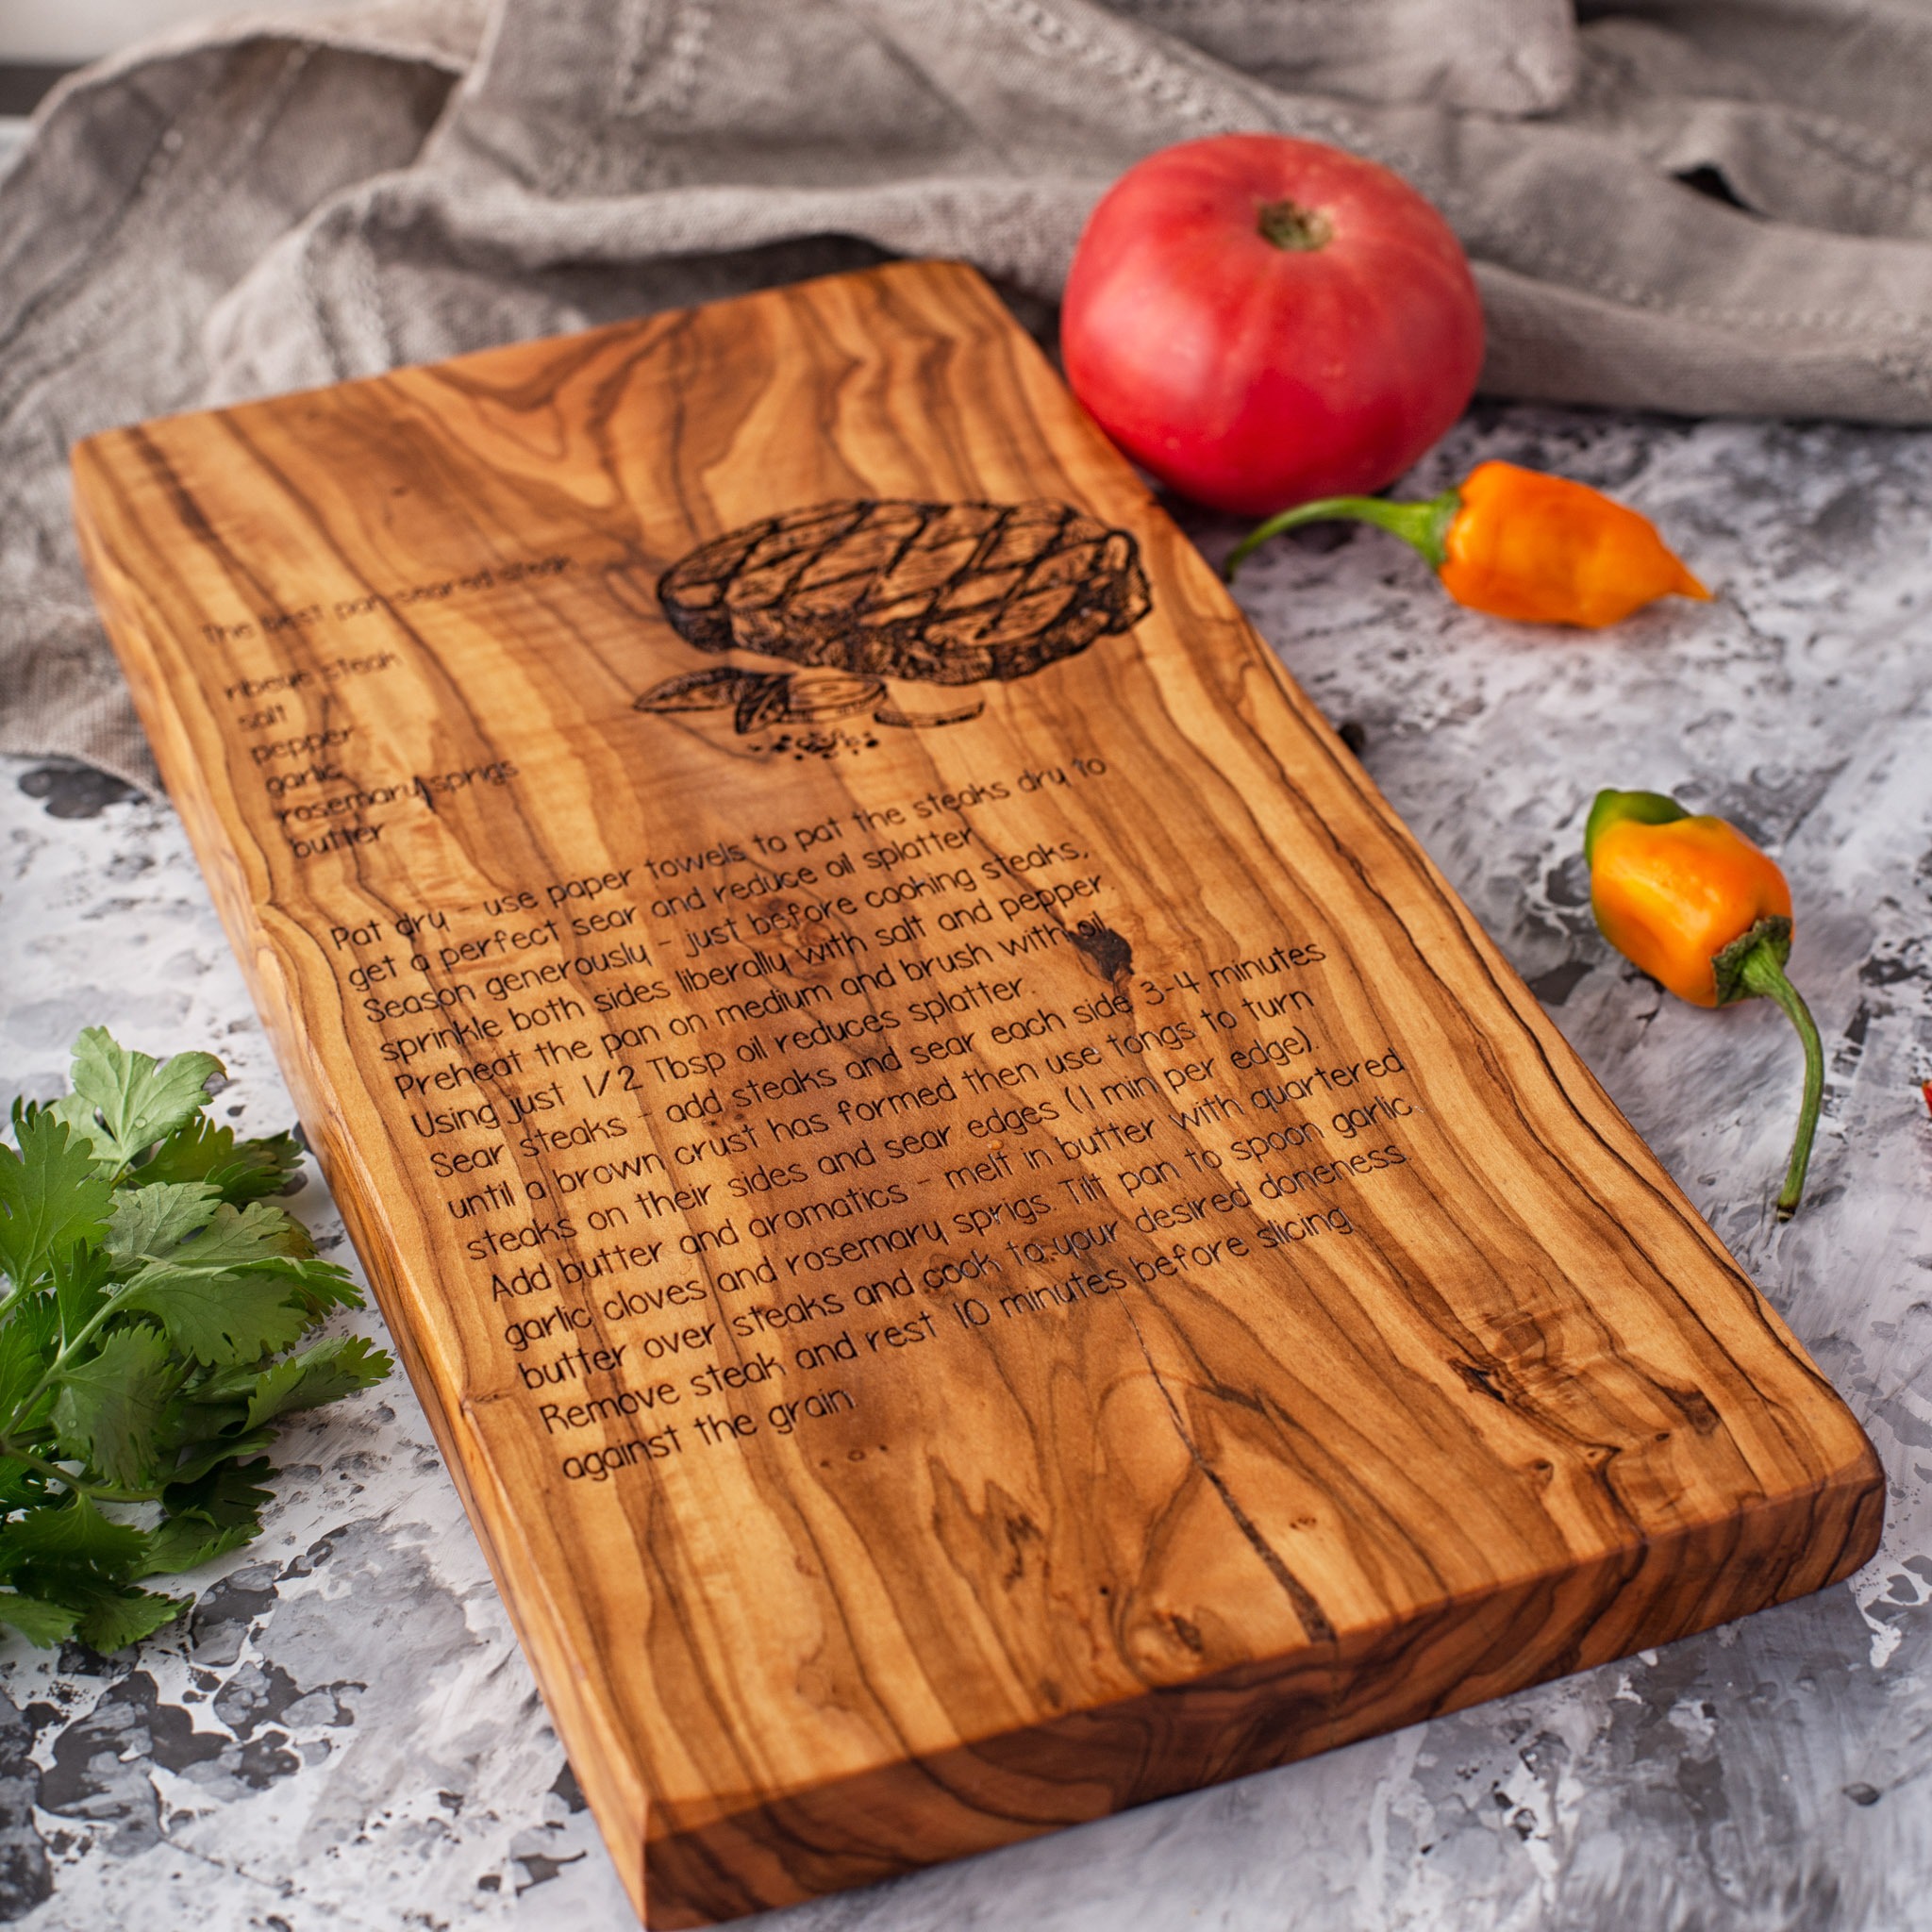 Olive wood serving board for recipes